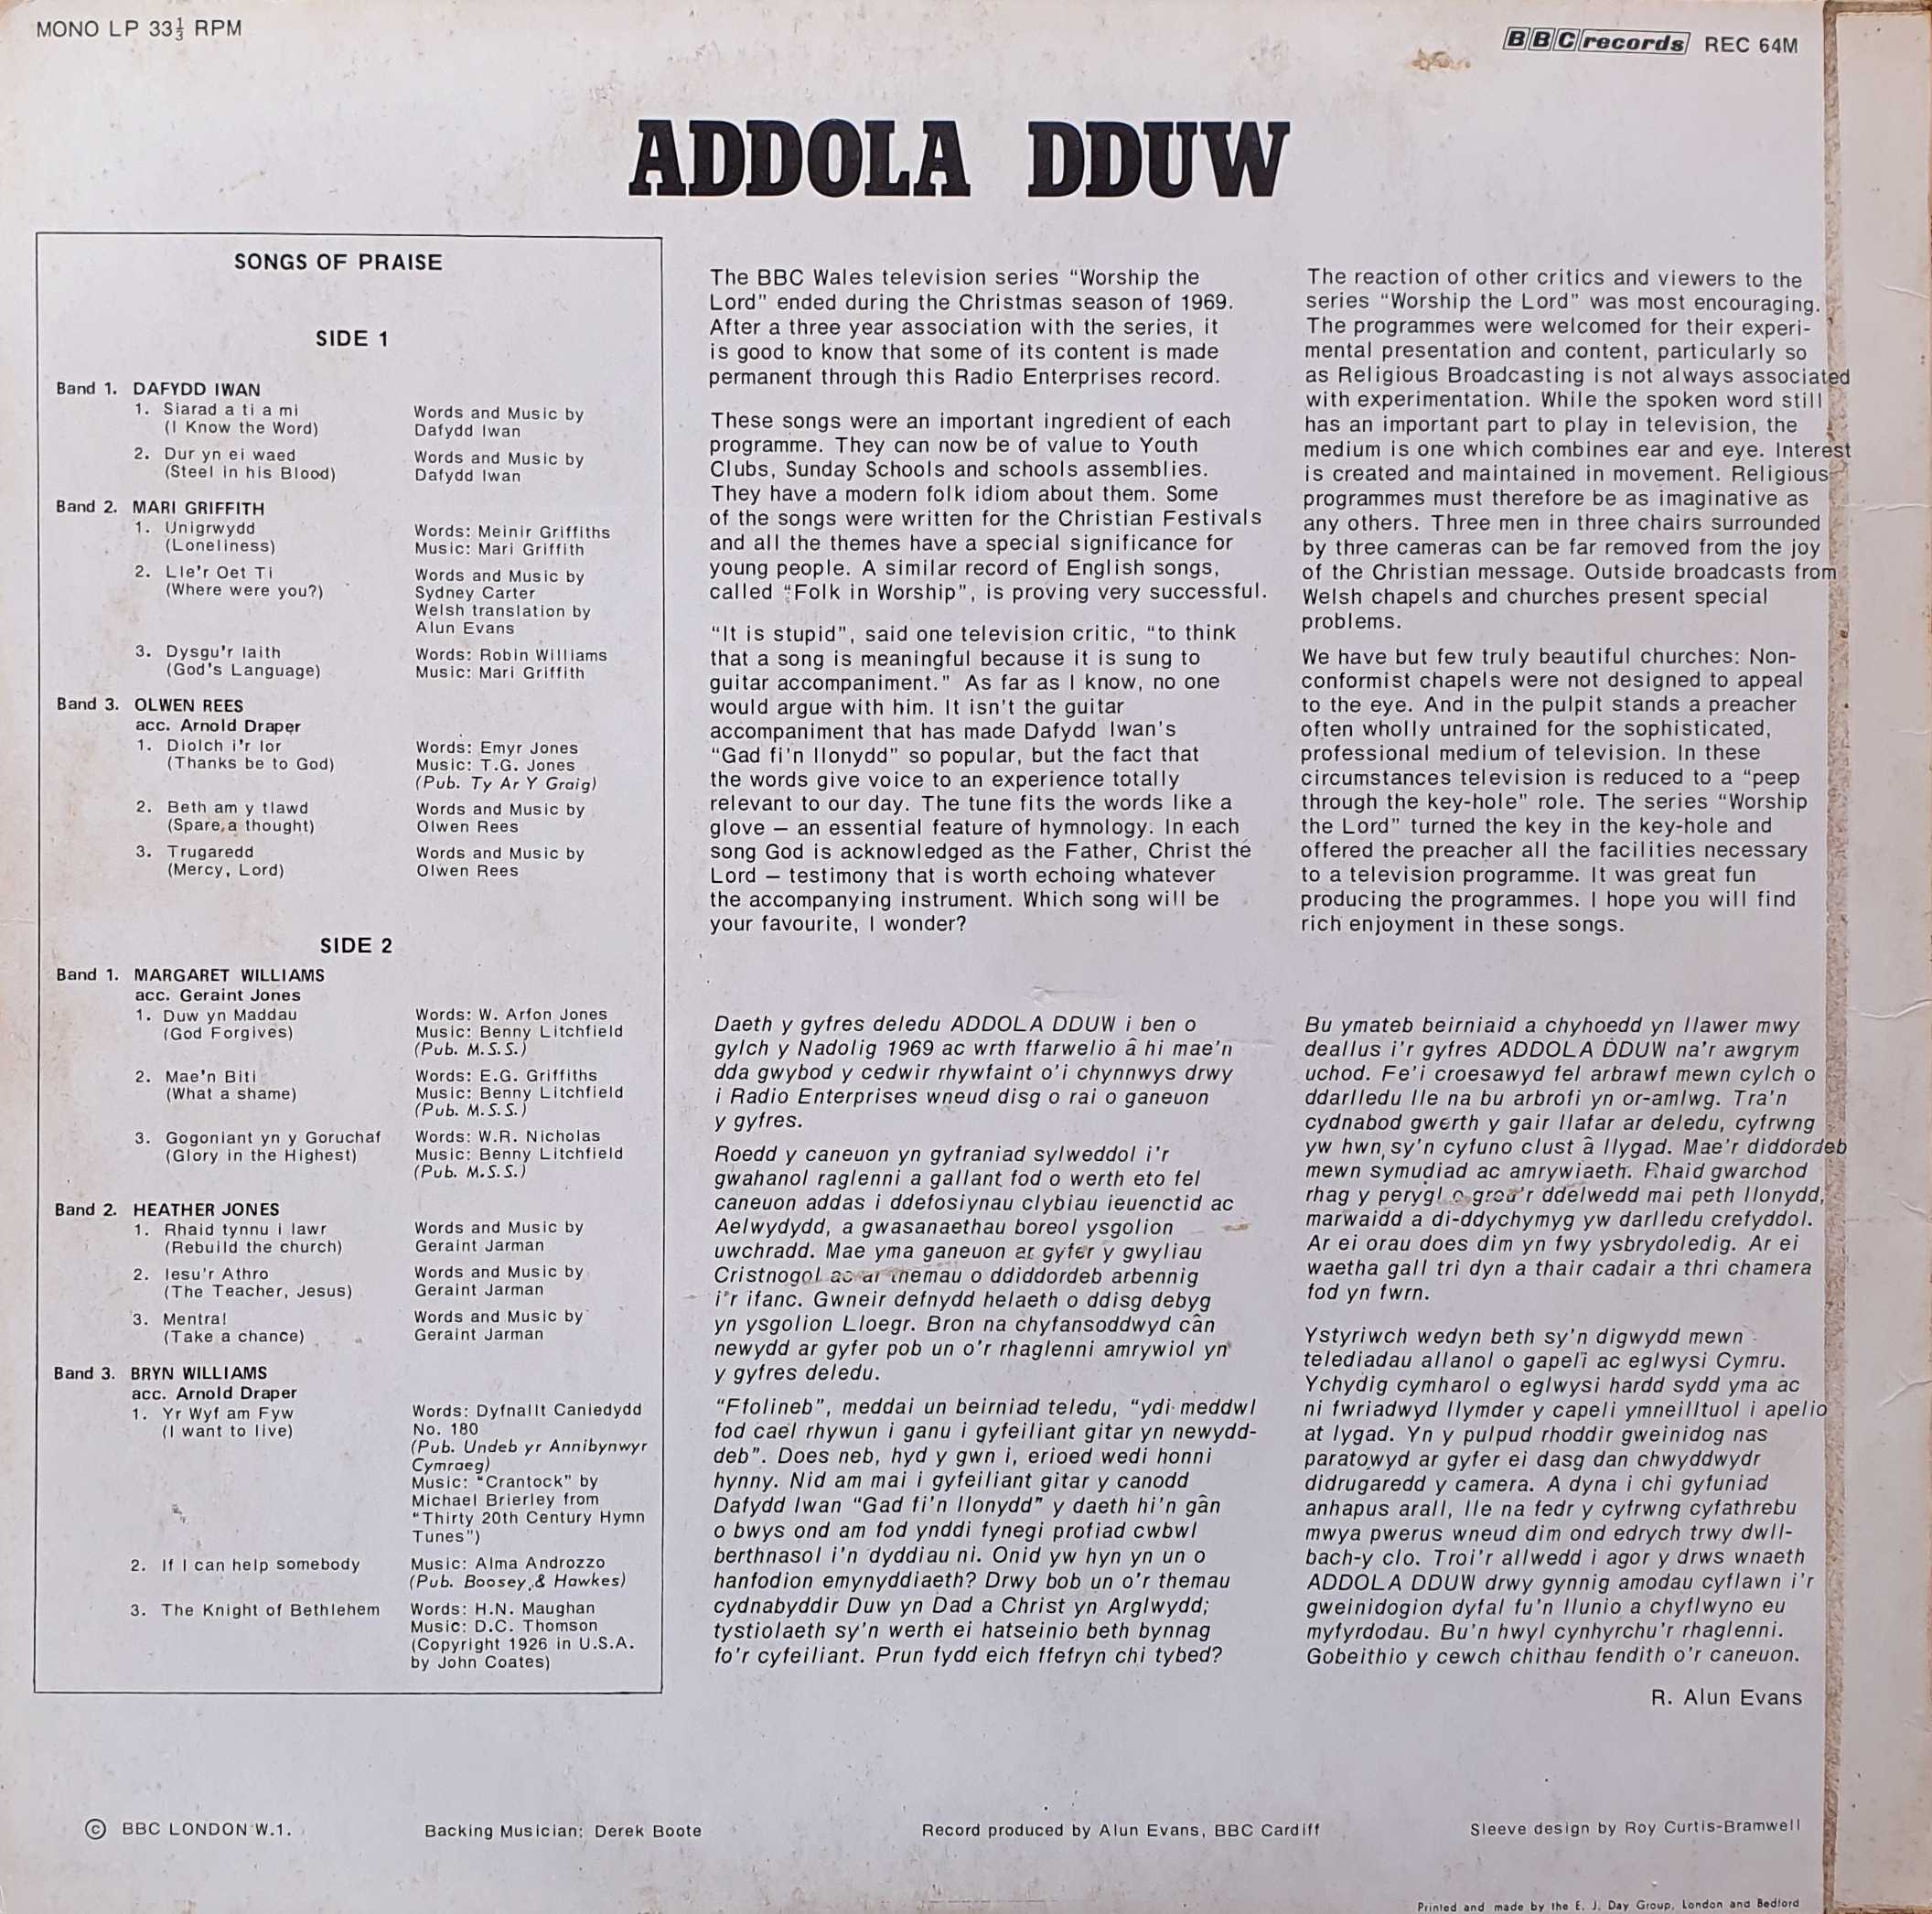 Picture of REC 64 Addola dduw by artist Various from the BBC records and Tapes library